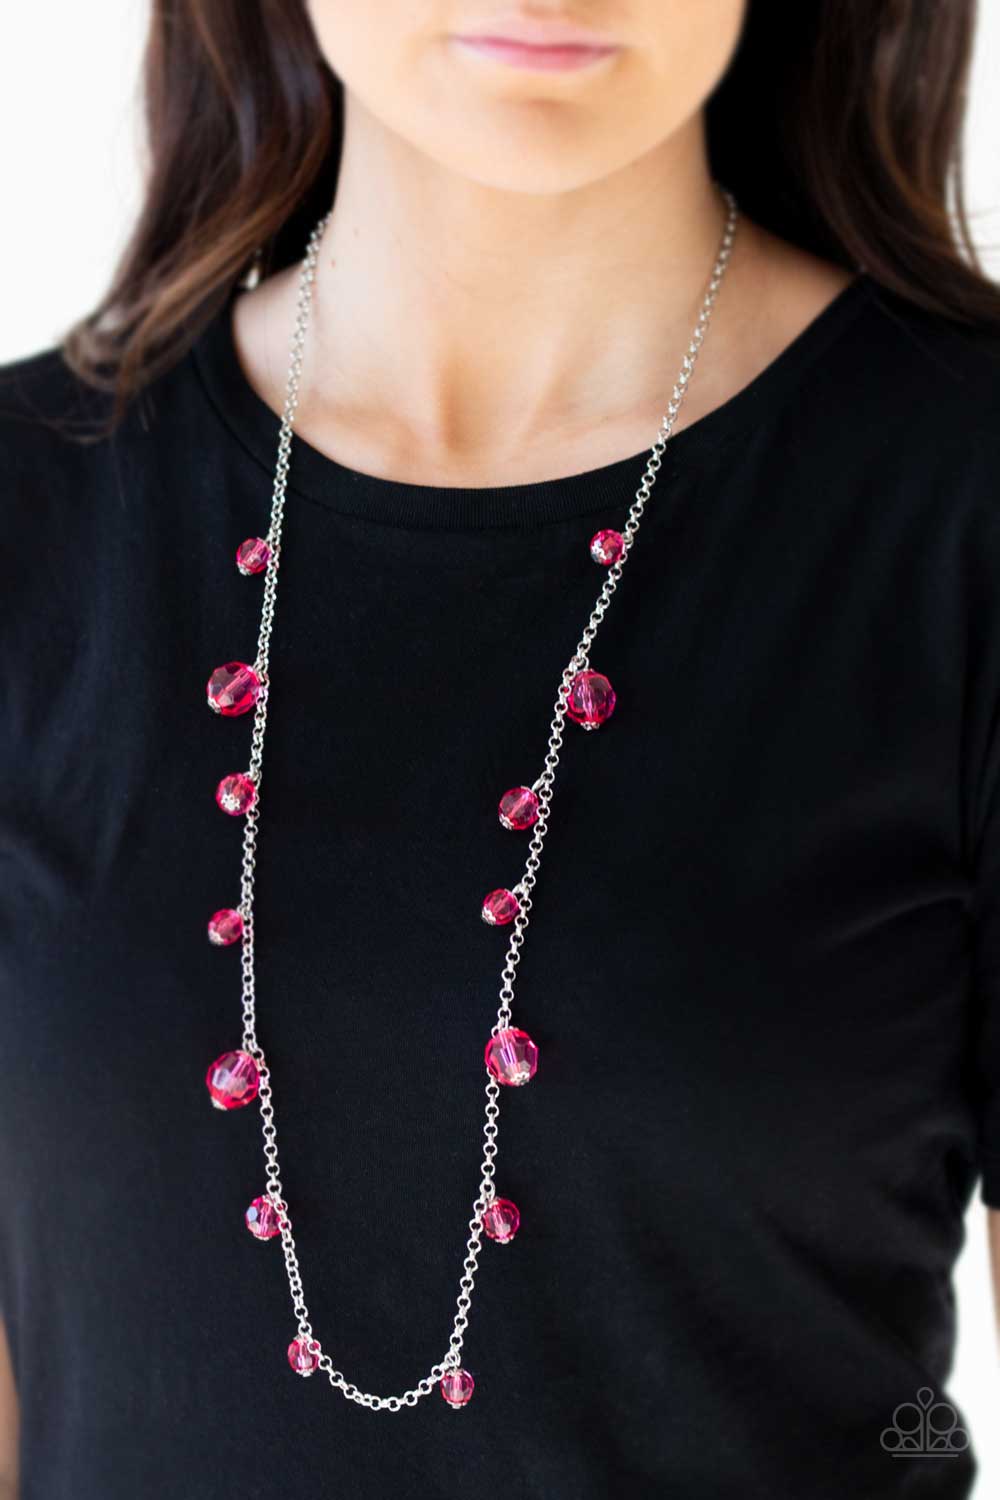 GLOW-Rider Pink Necklace - Paparazzi Accessories - lightbox -CarasShop.com - $5 Jewelry by Cara Jewels